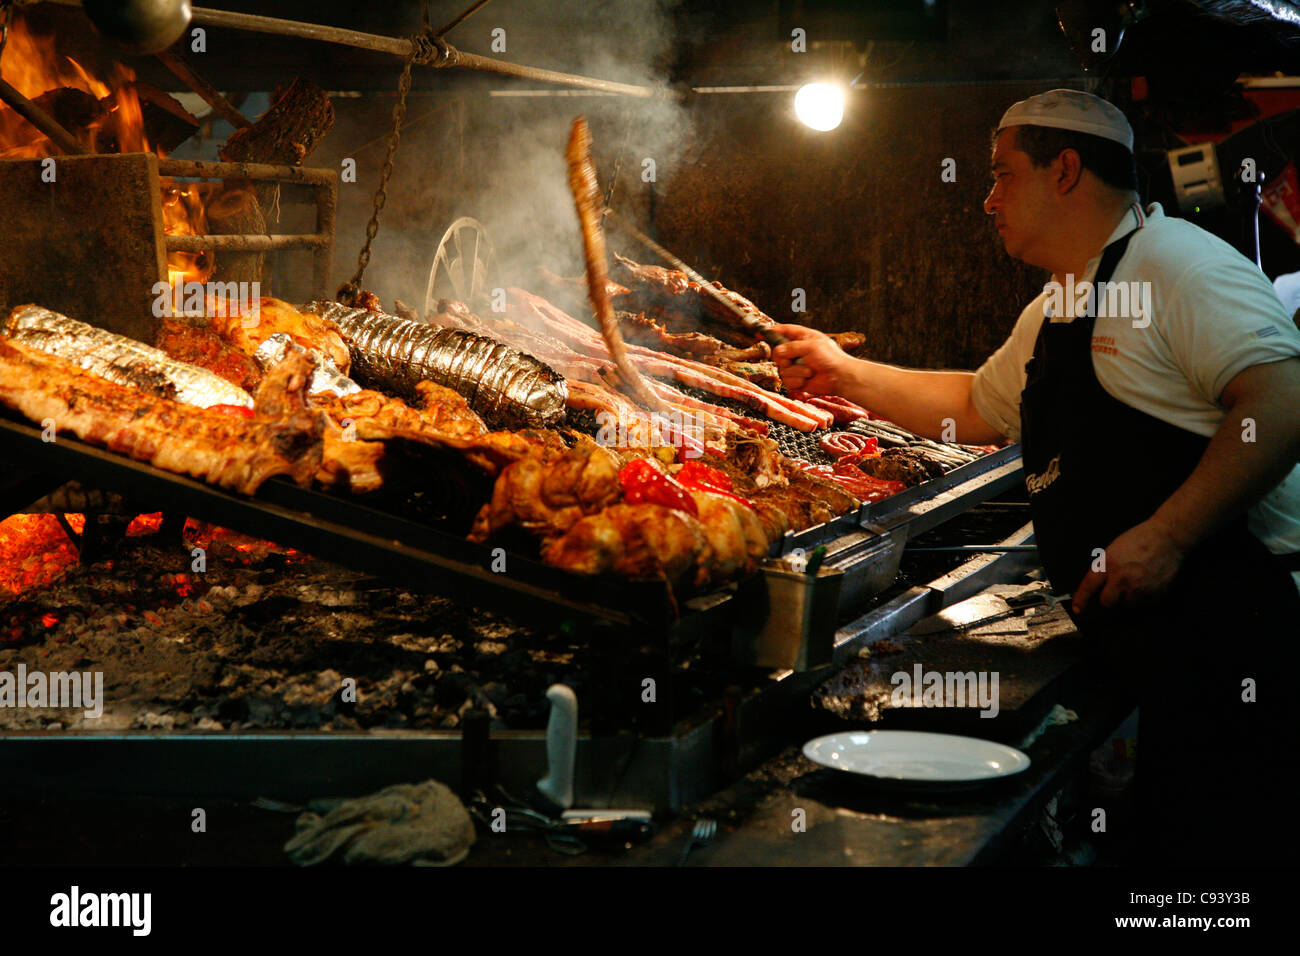 Meats cooked over wood barbecues at the Mercado del Puerto, Montevideo, Uruguay. Stock Photo